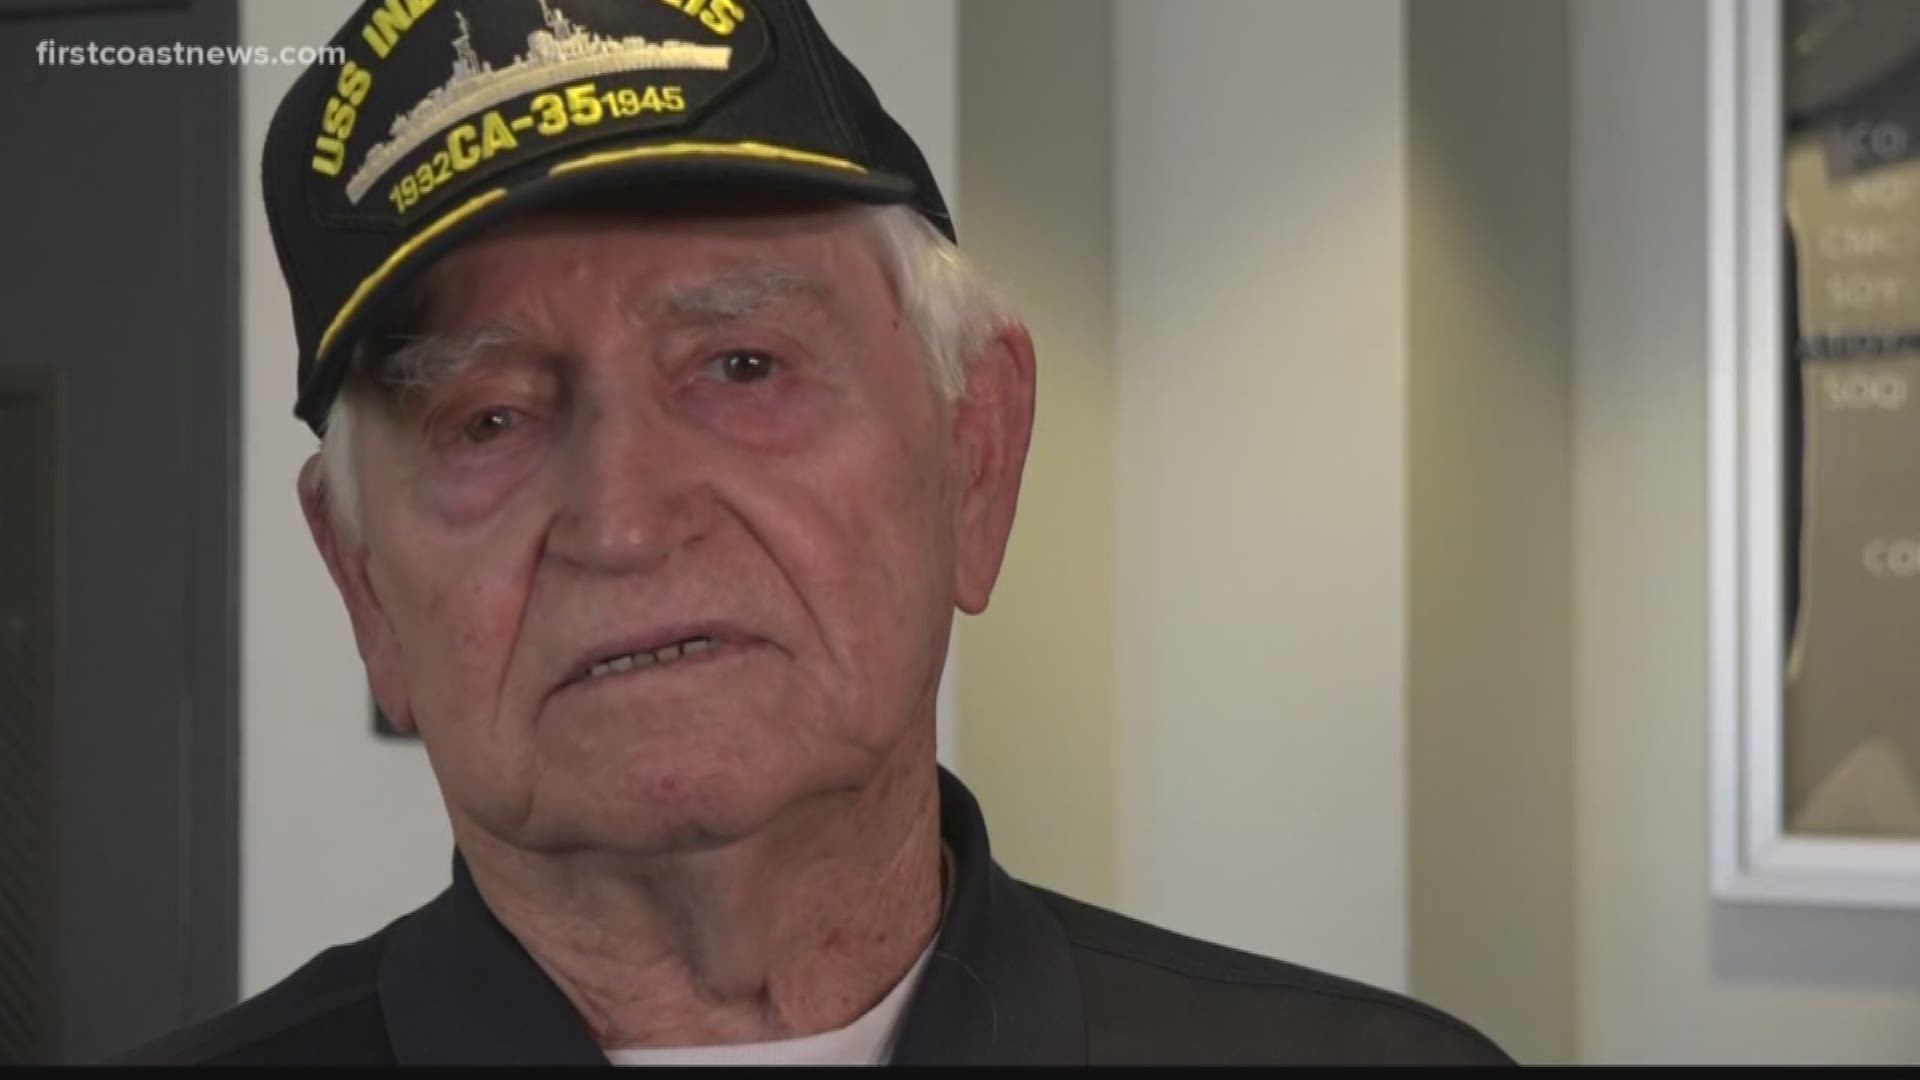 Three survivors from the USS Indianapolis recounted their near-death experiences in Jacksonville on Monday.